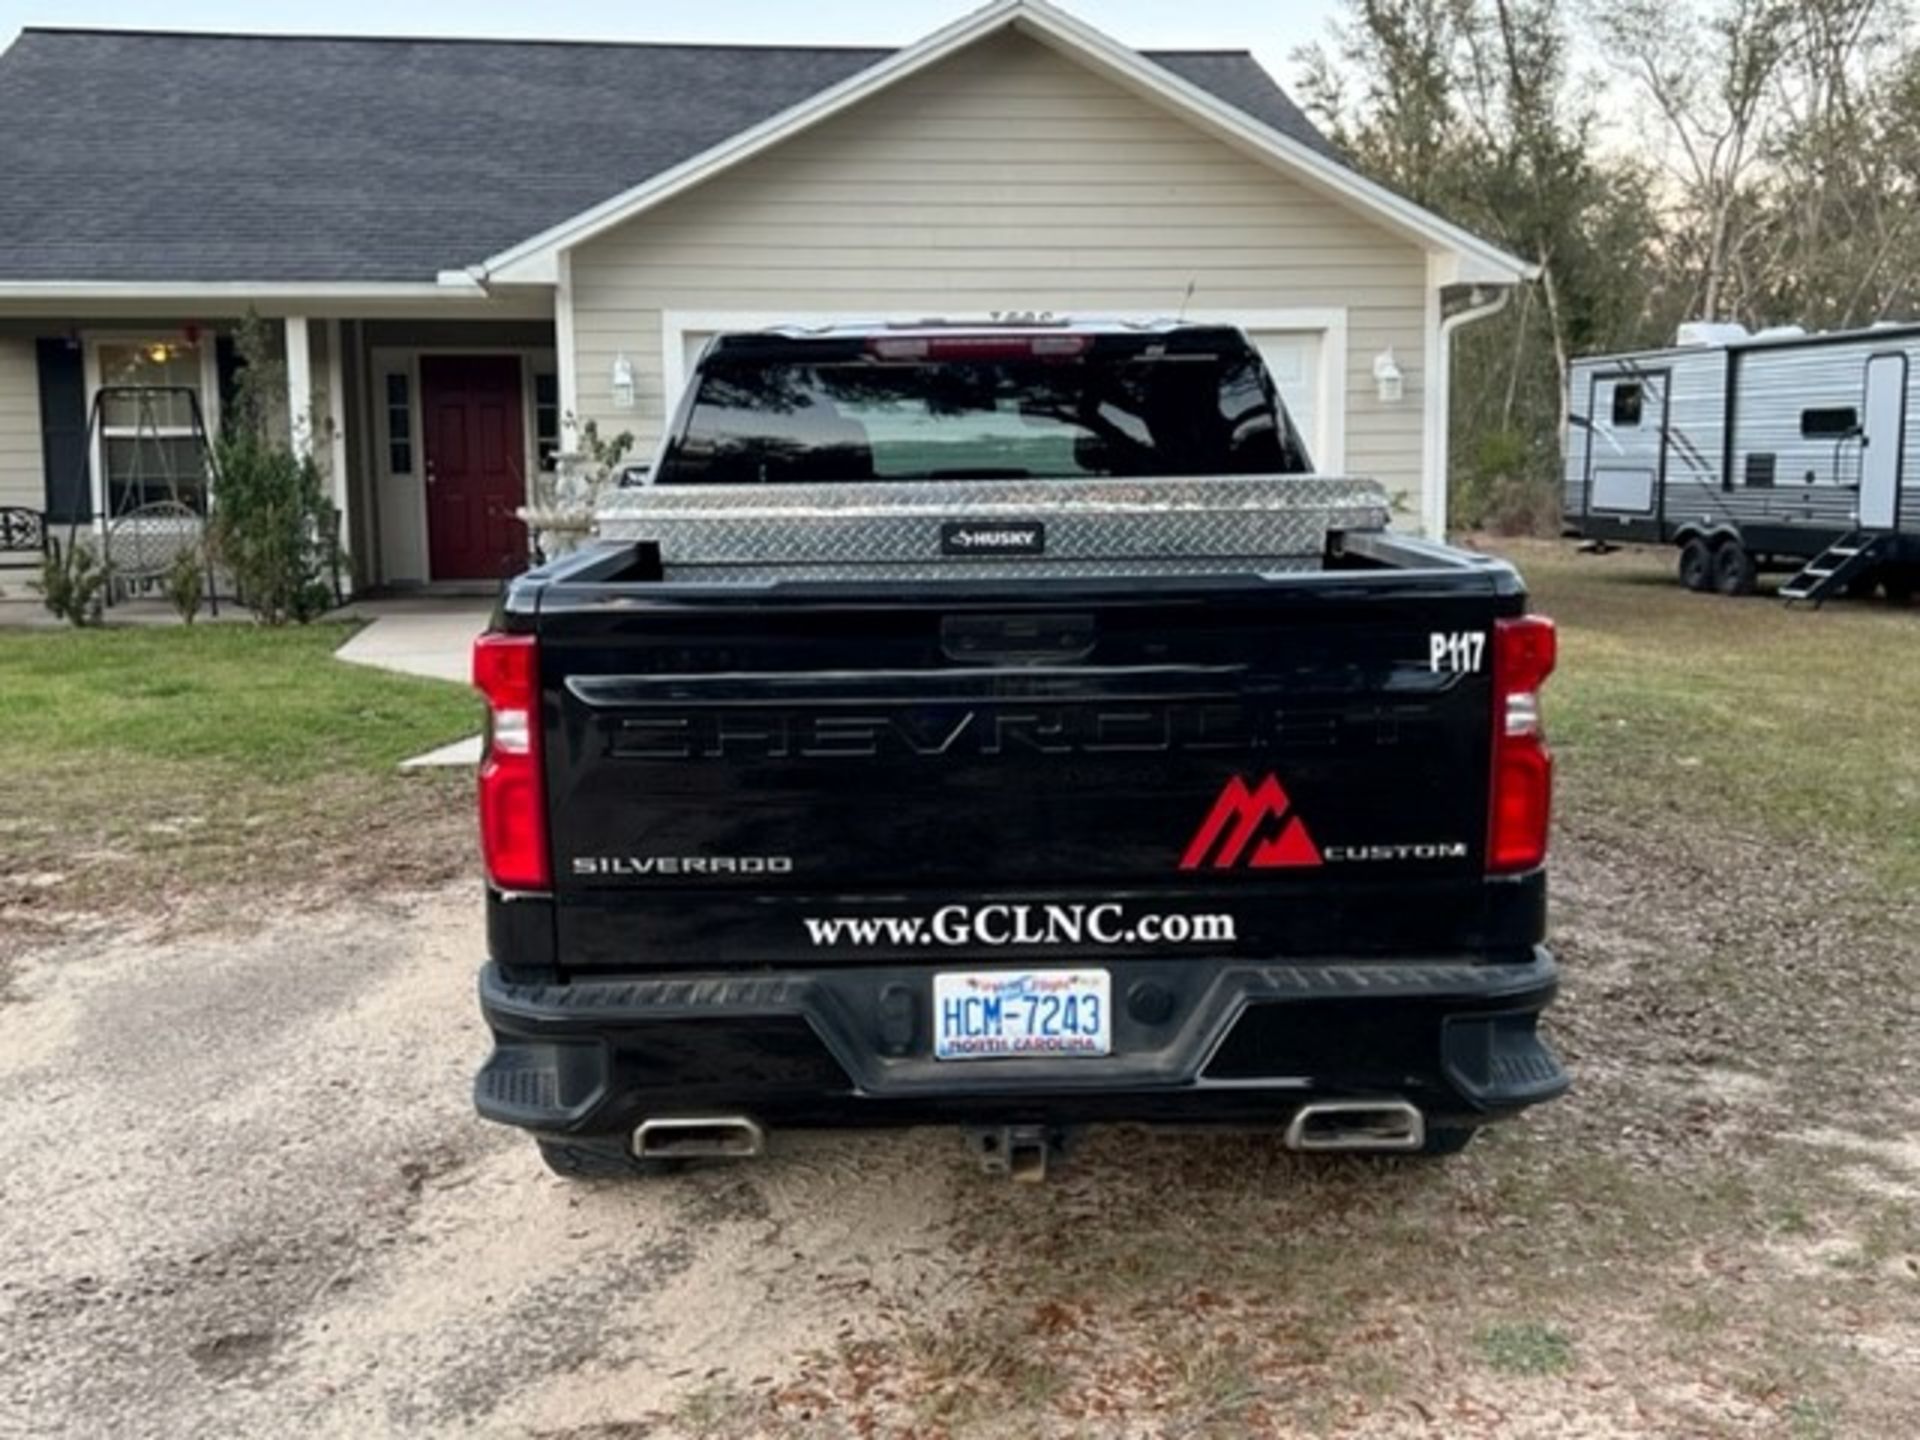 2020 Chevy Silverado 1500 4WD Crew Cab Pickup, VIN 1GCUYBEF1LZ151626, 92,000 Miles Indicated, P117 ( - Image 3 of 11